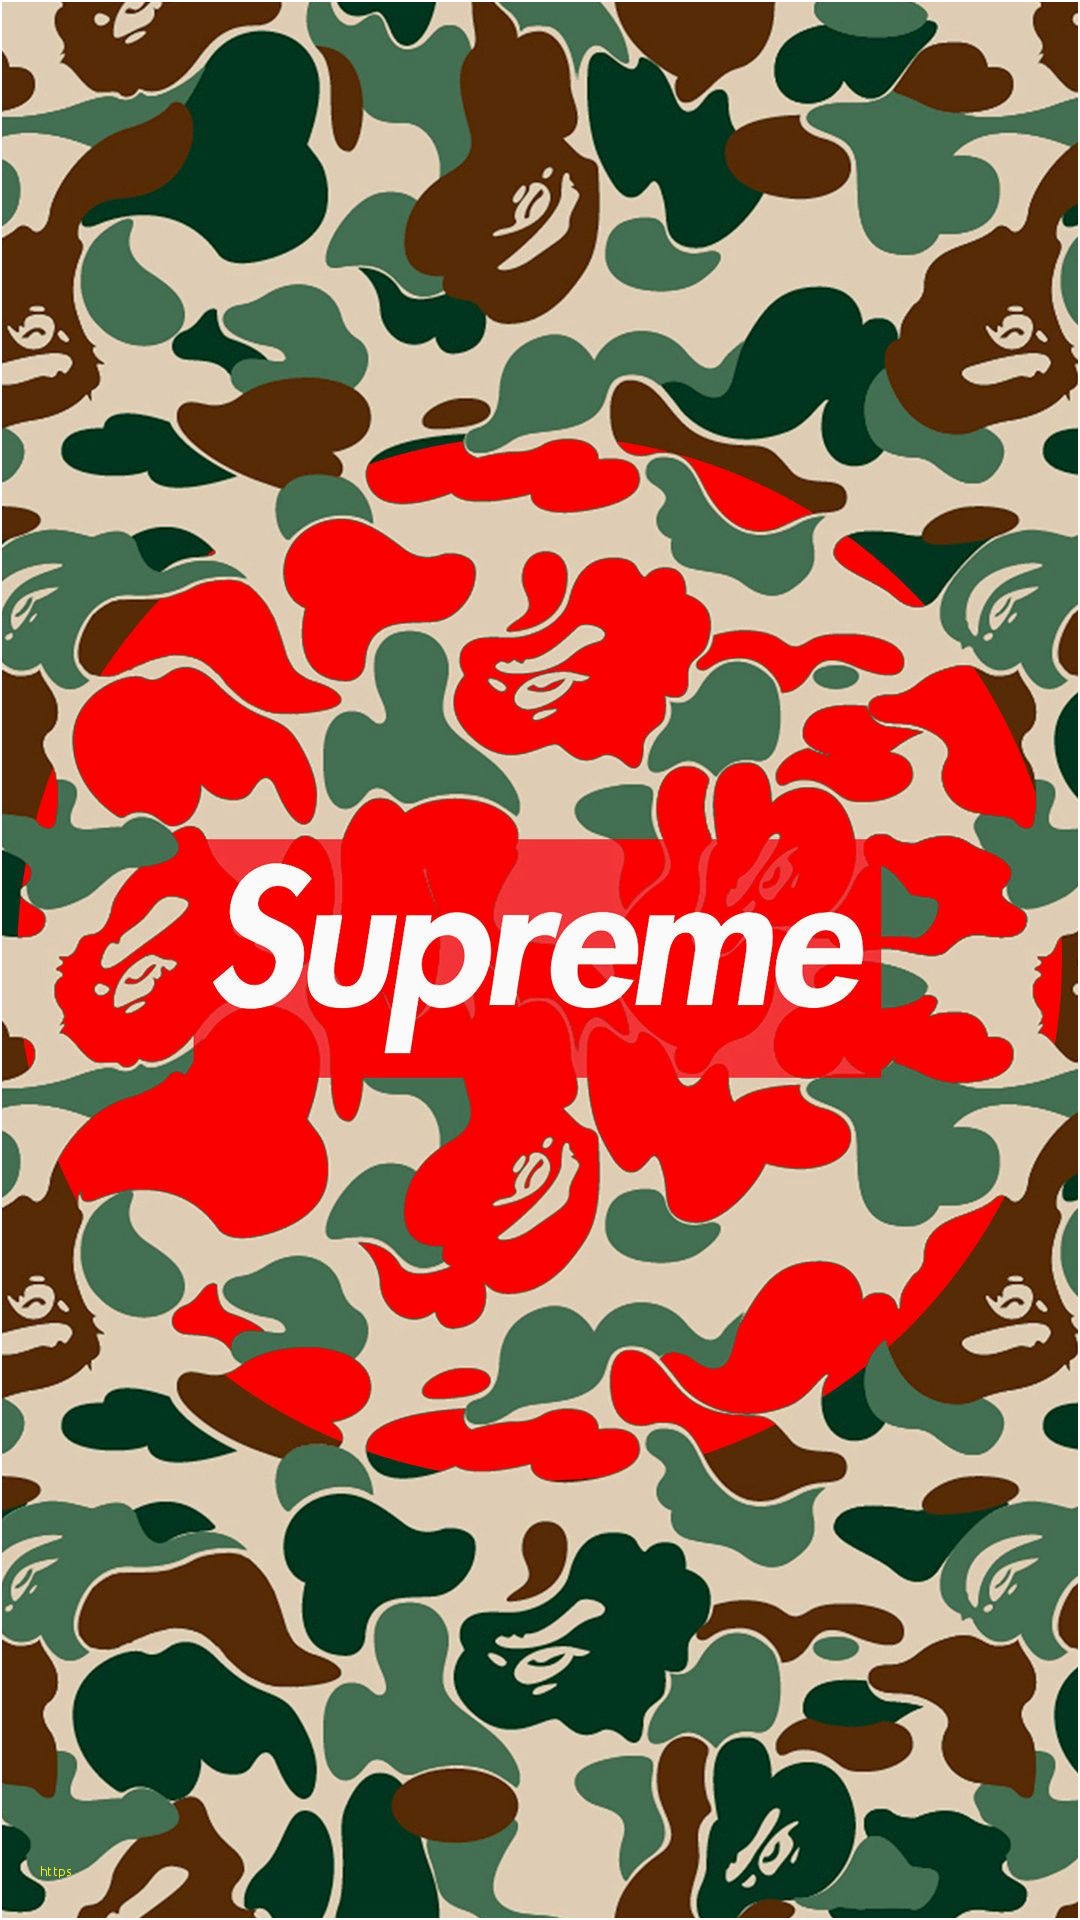 Supreme X ア ベイシング エイプ Iphone Wallpapers